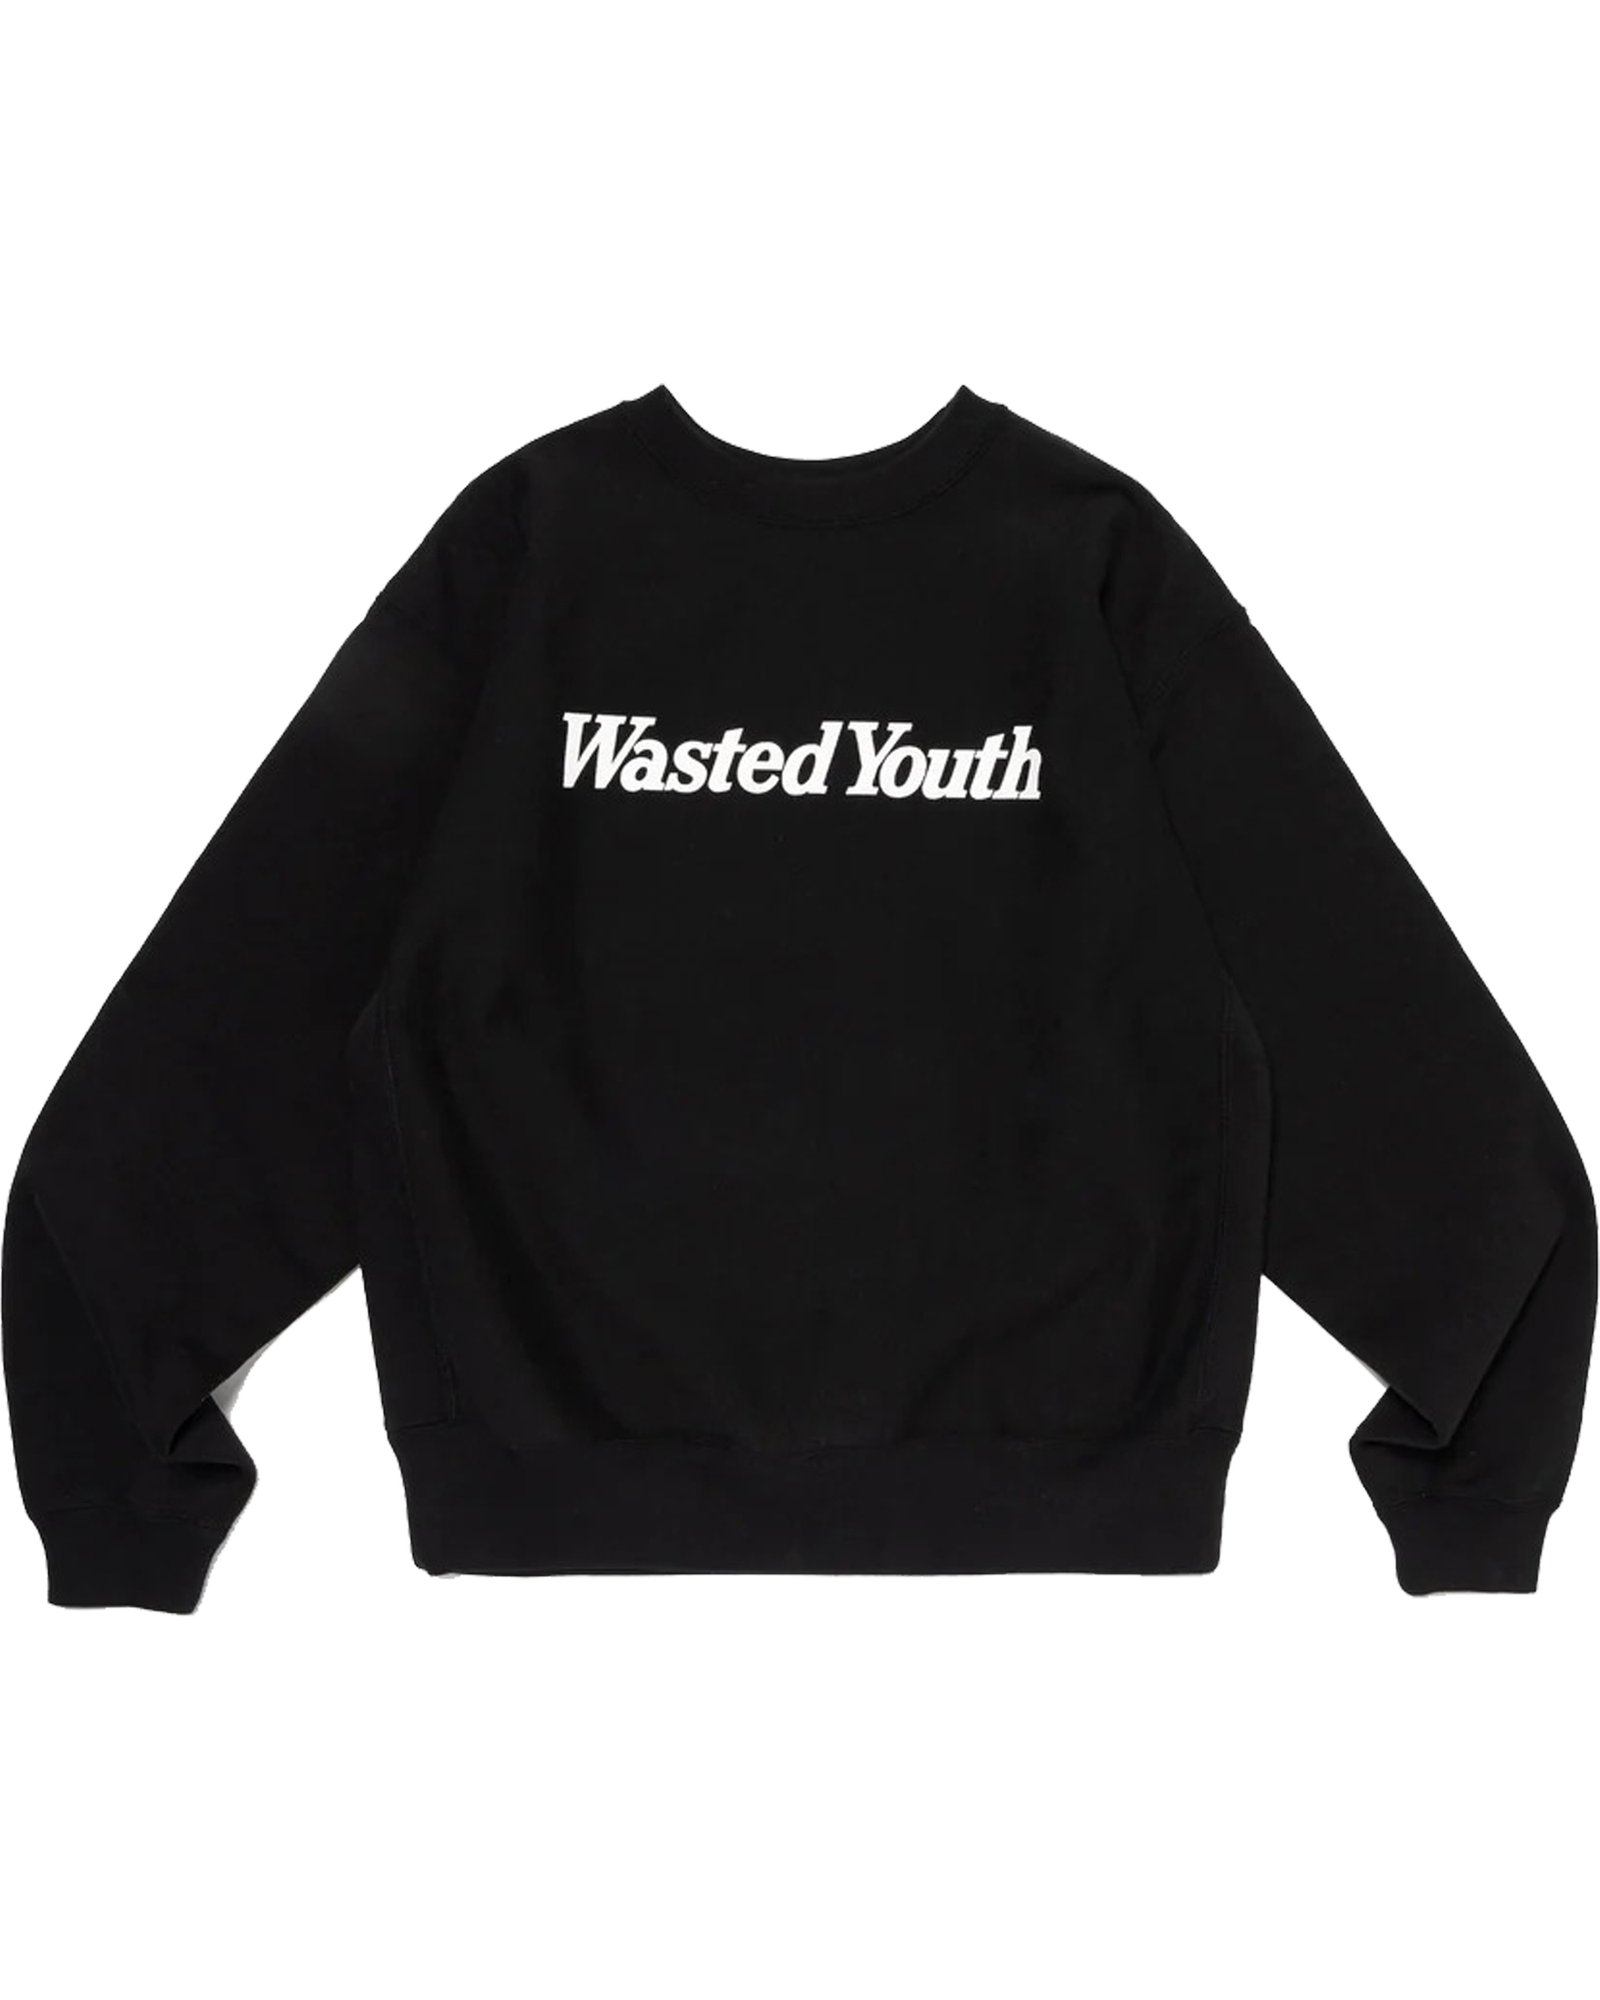 Wasted Youth Hoodie #1 